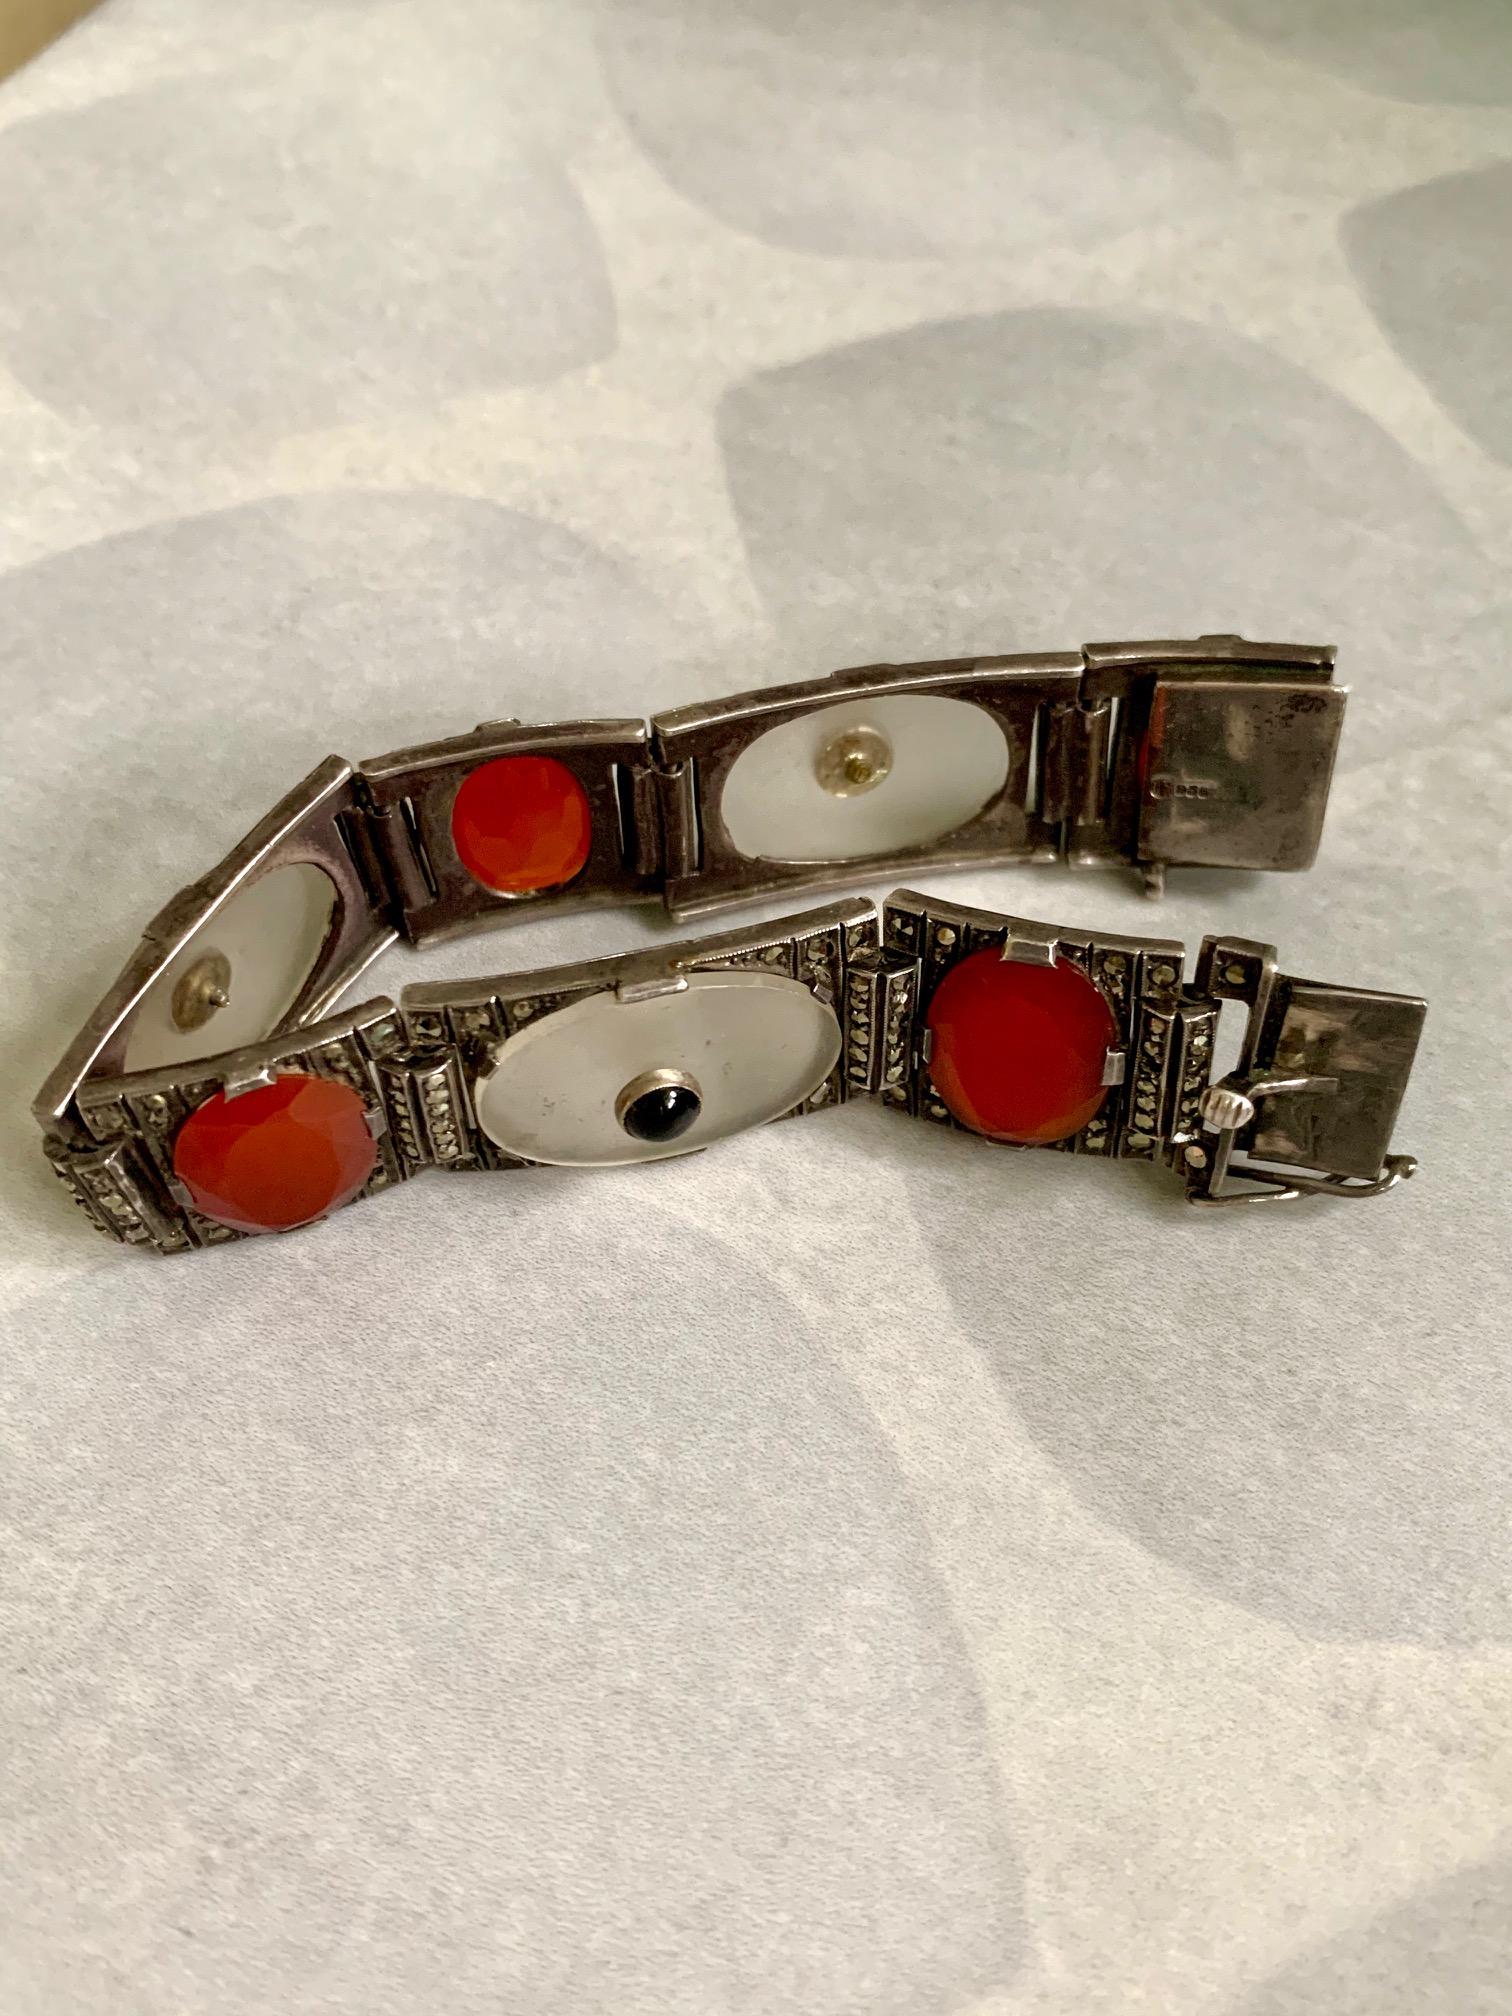 This Art Deco theodor Fahrner bracelet features Rock Crystal, Black Onyx, Carnelian and Marcasite.  It is stamped 